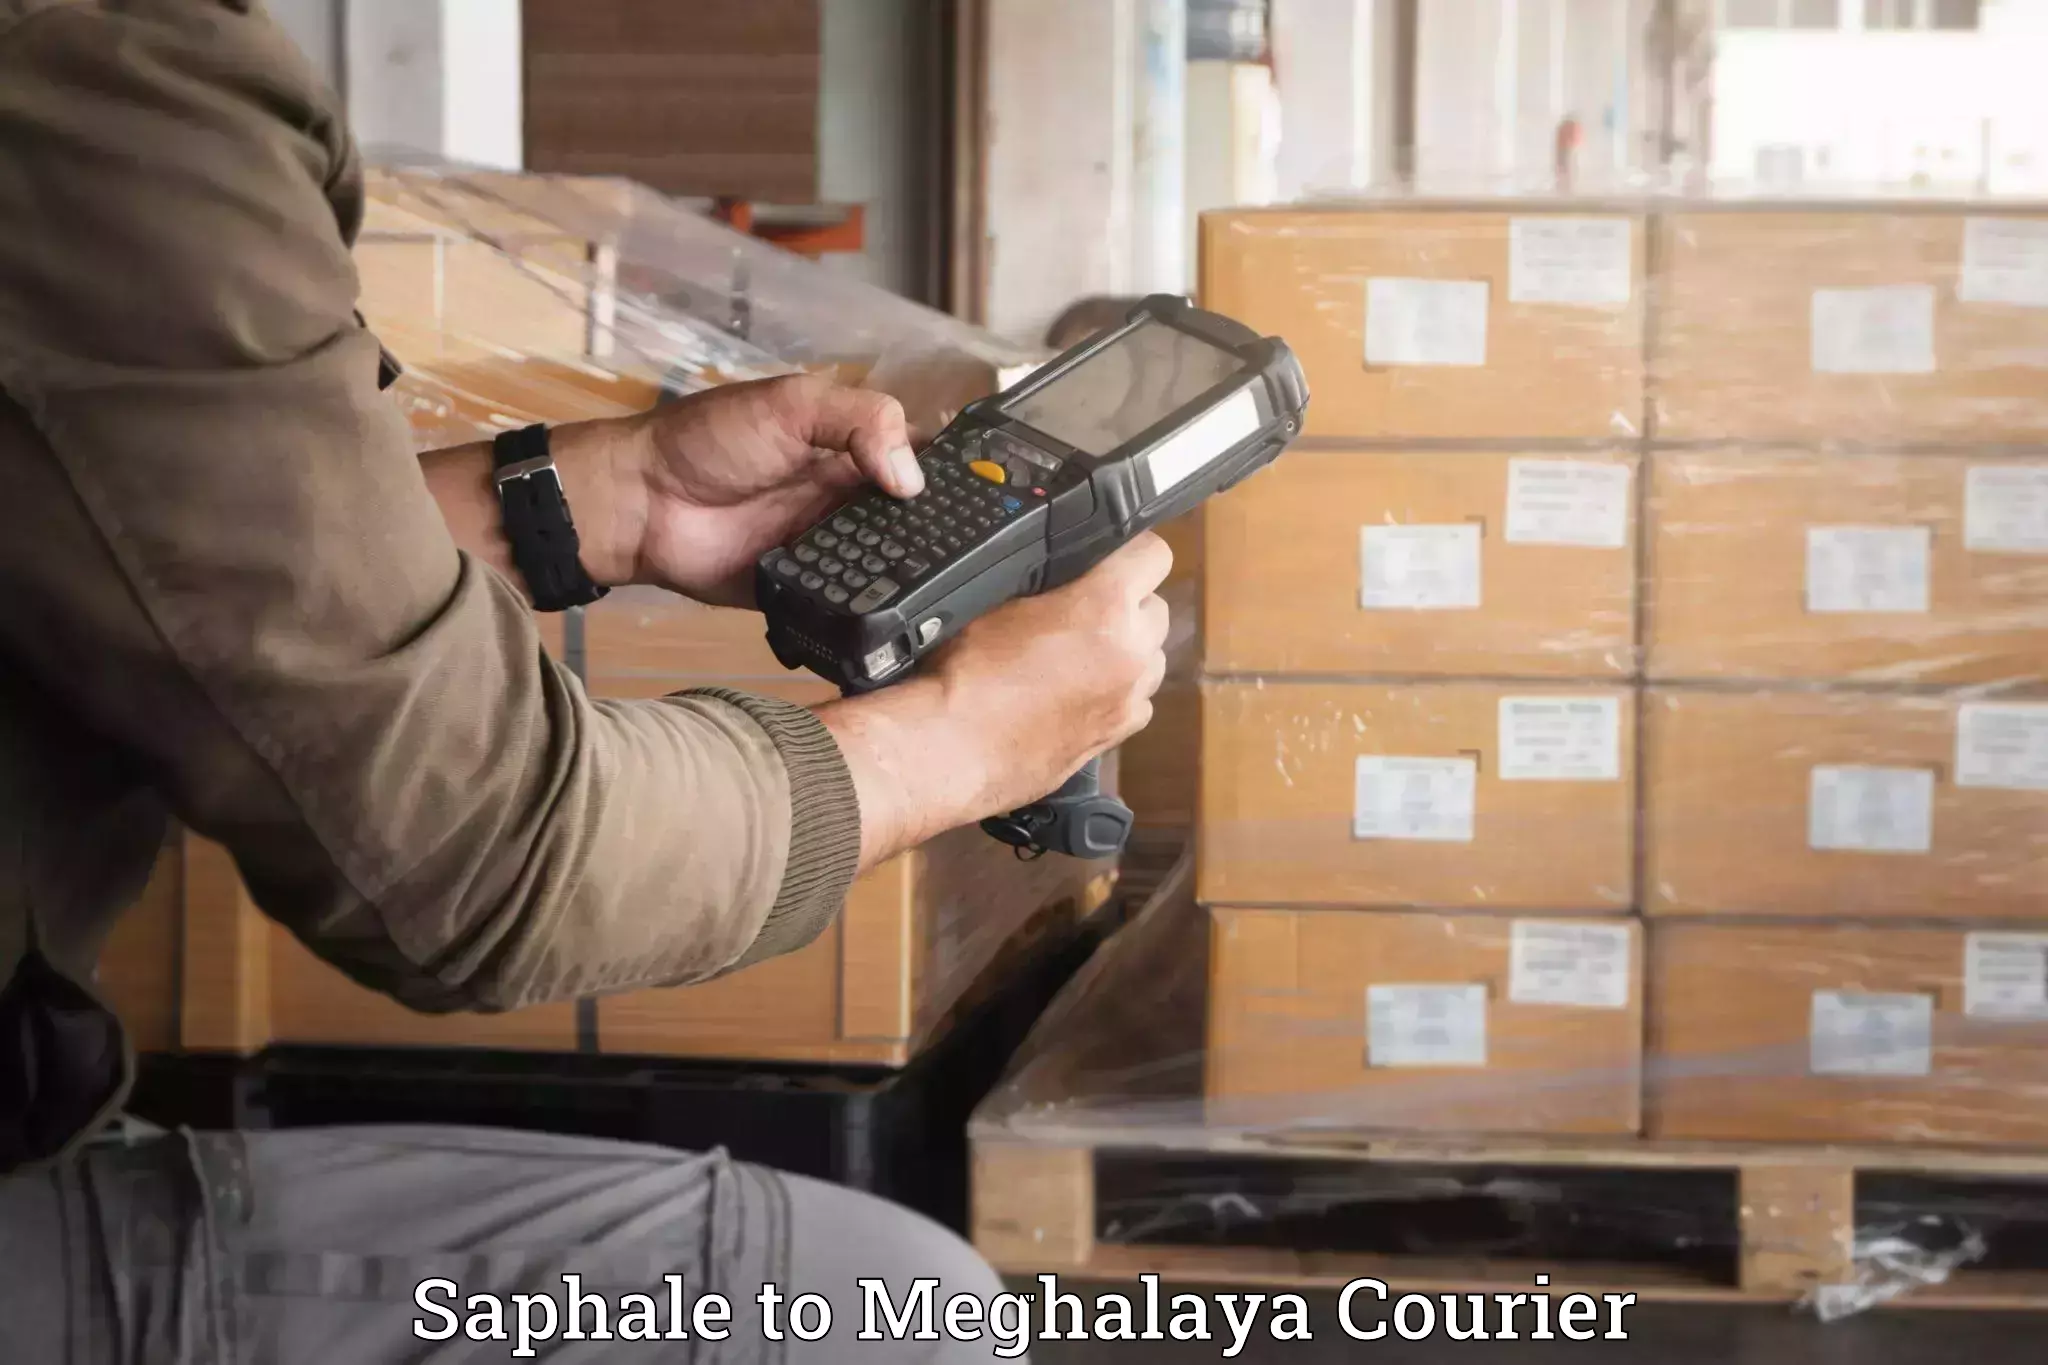 Nationwide luggage courier Saphale to Dkhiah West